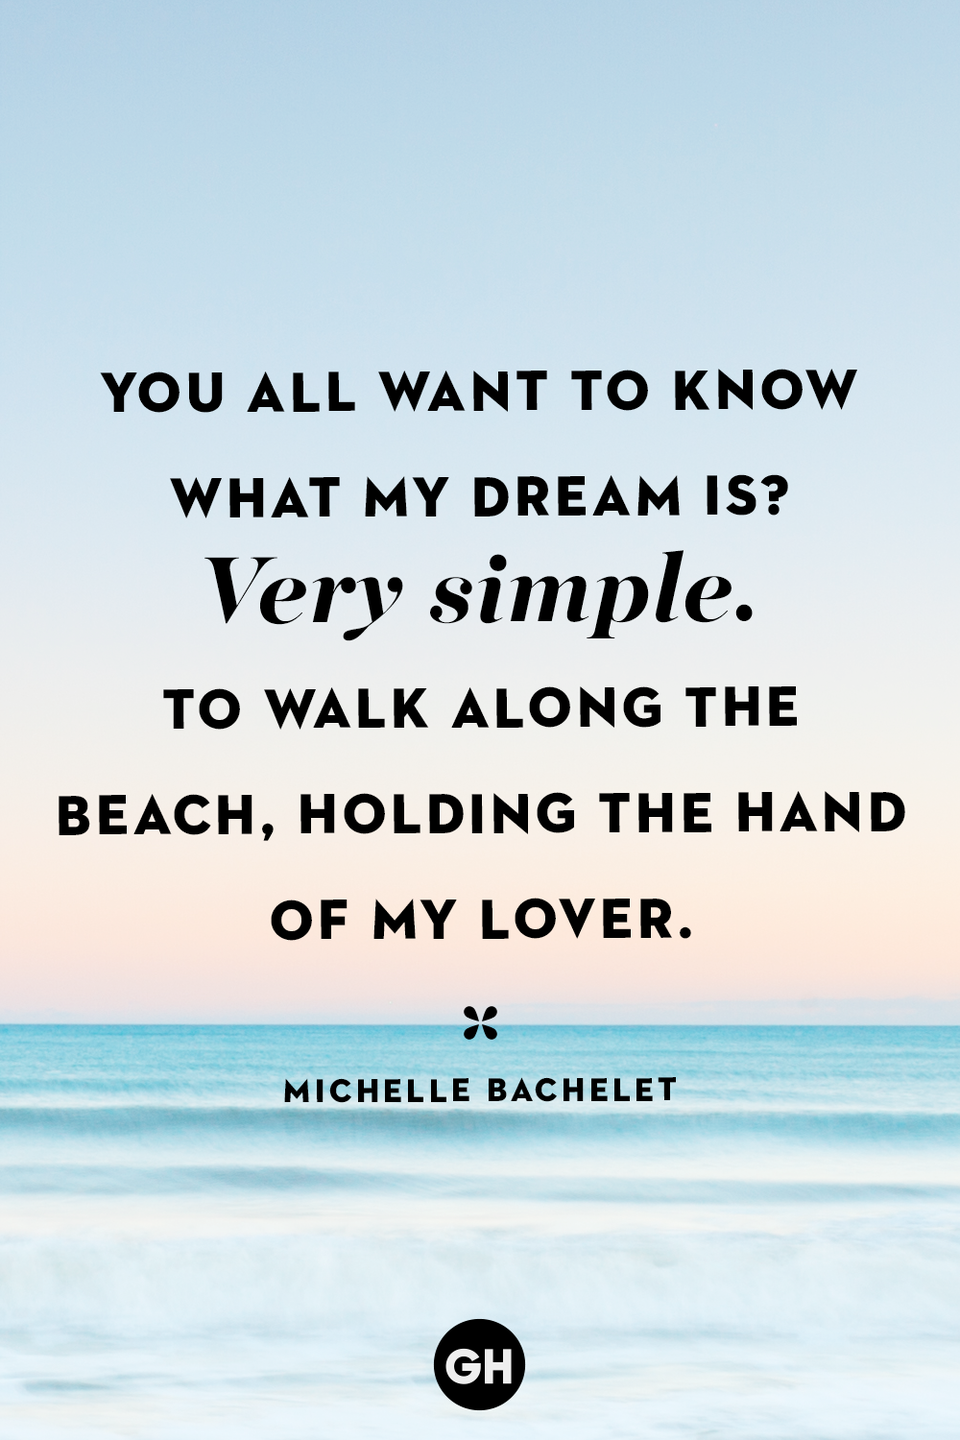 <p>You all want to know what my dream is? Very simple. To walk along the beach, holding the hand of my lover.</p>